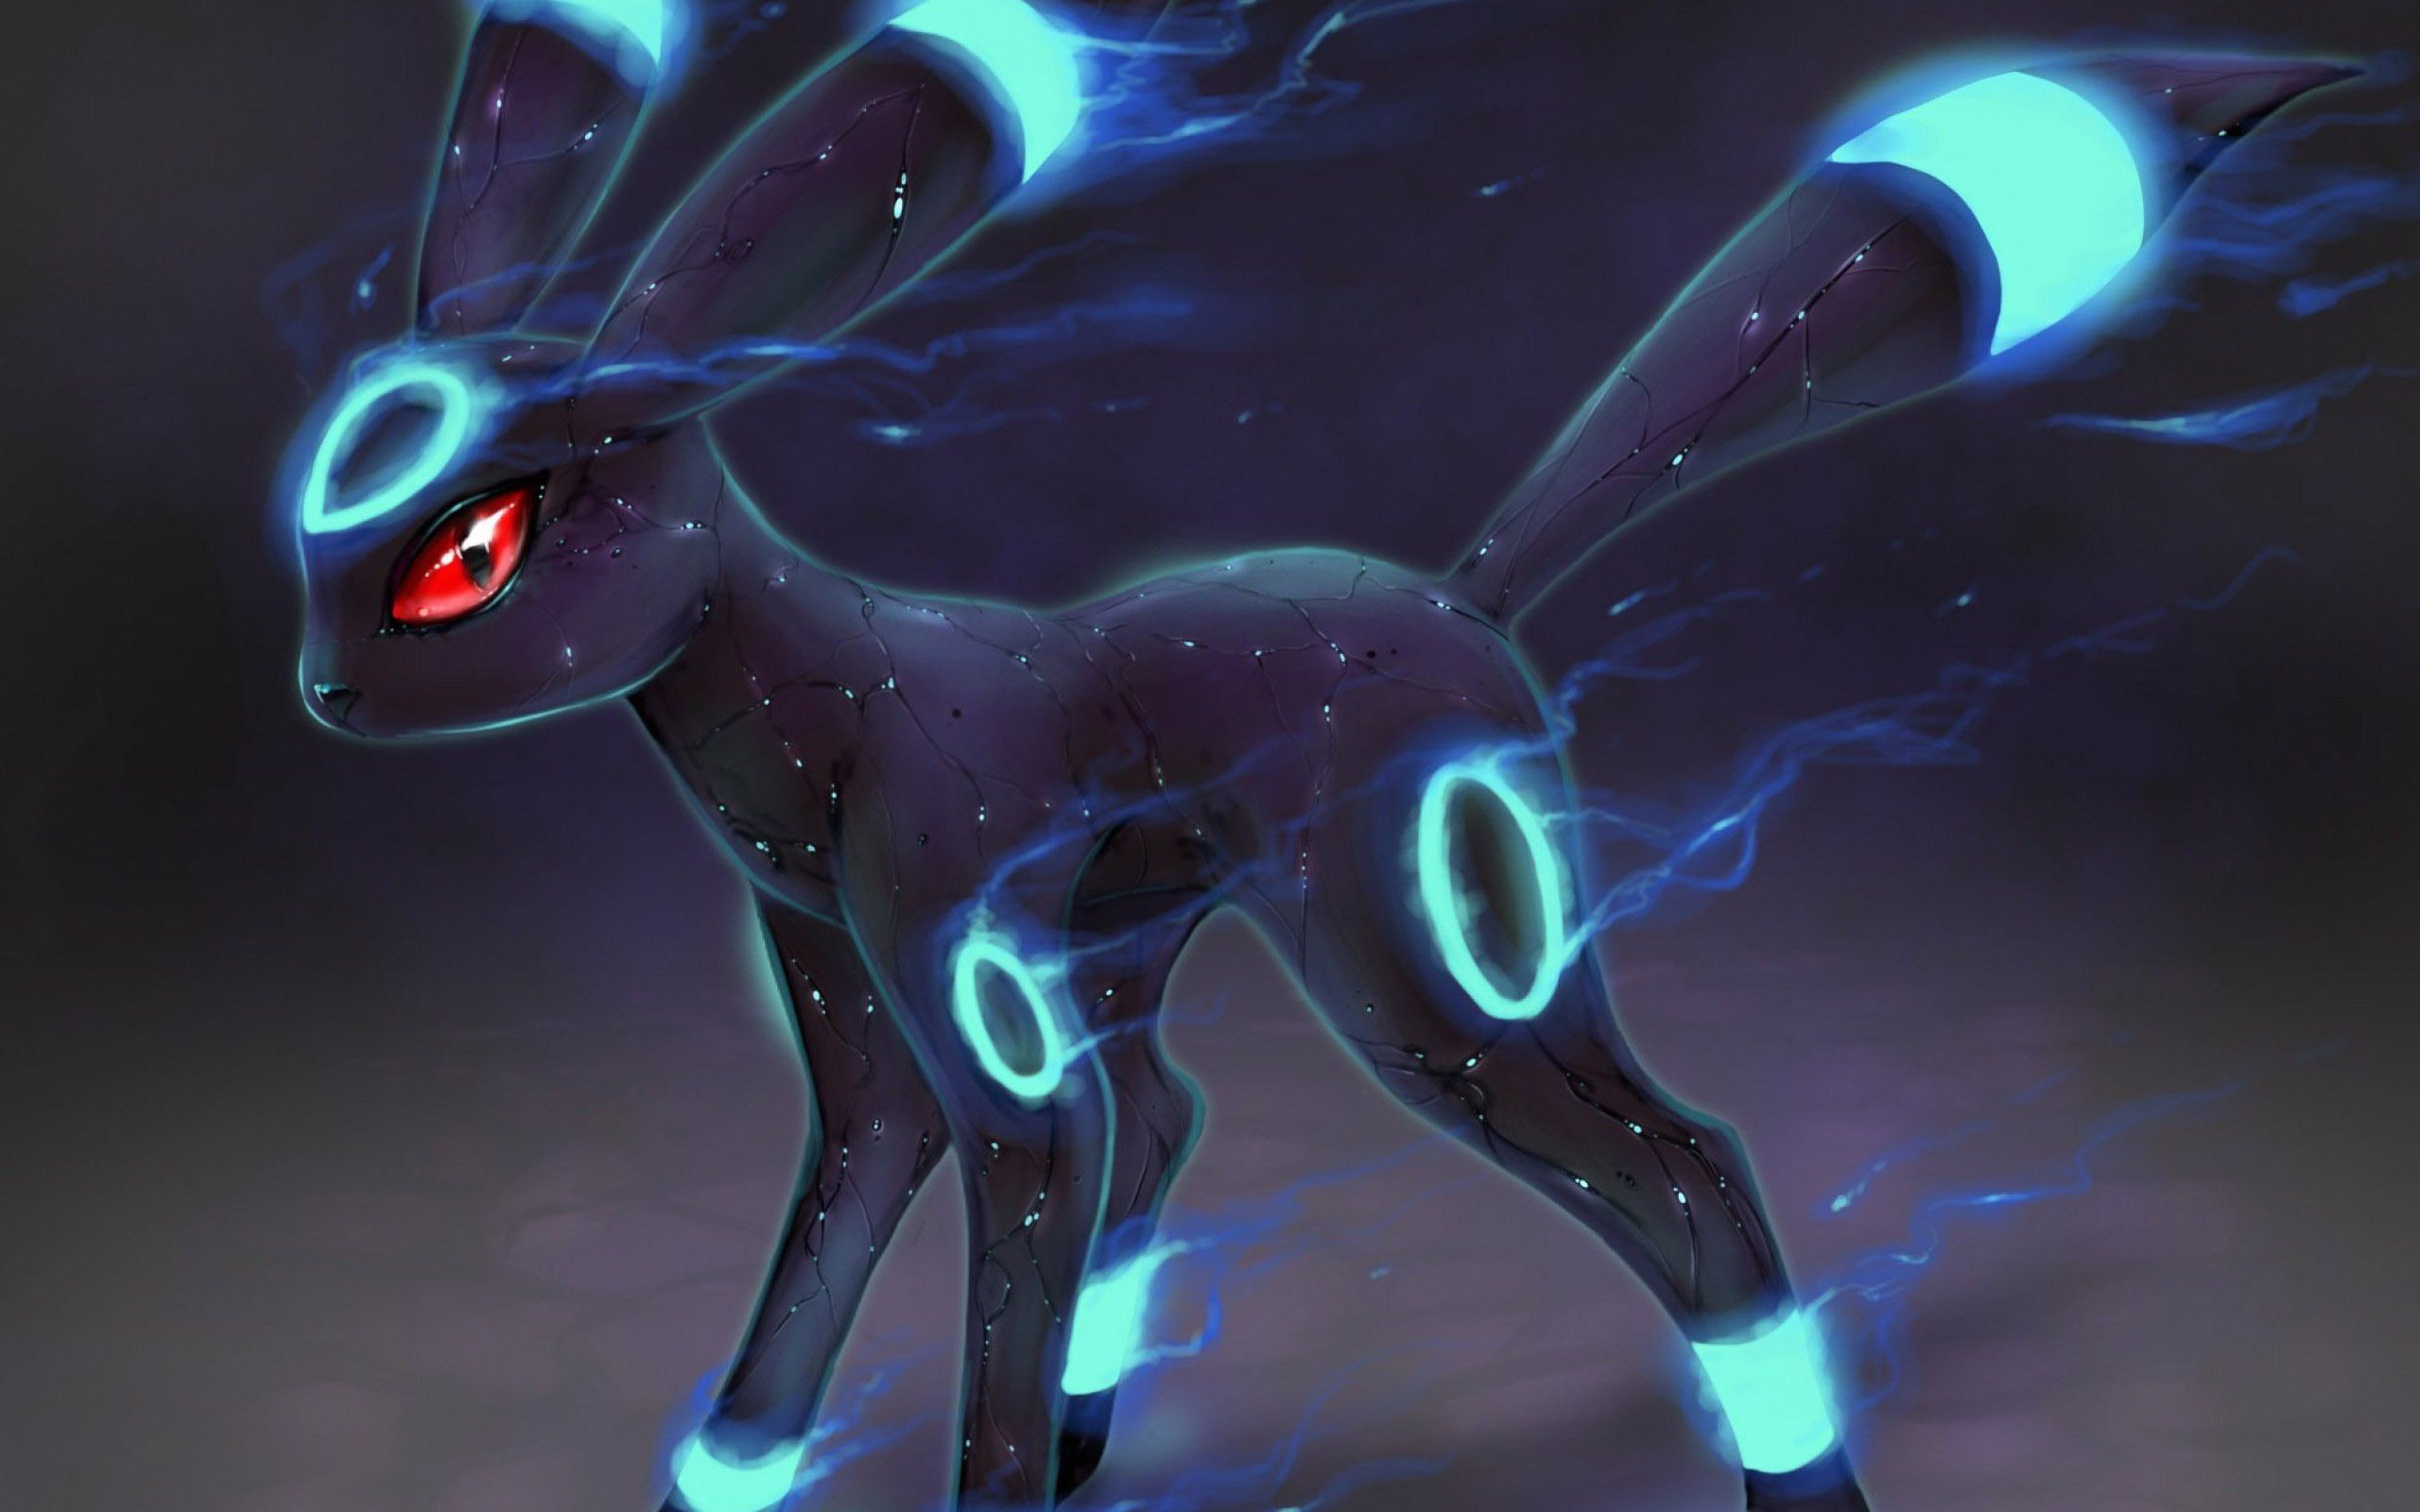 50 Umbreon Pokémon HD Wallpapers and Backgrounds